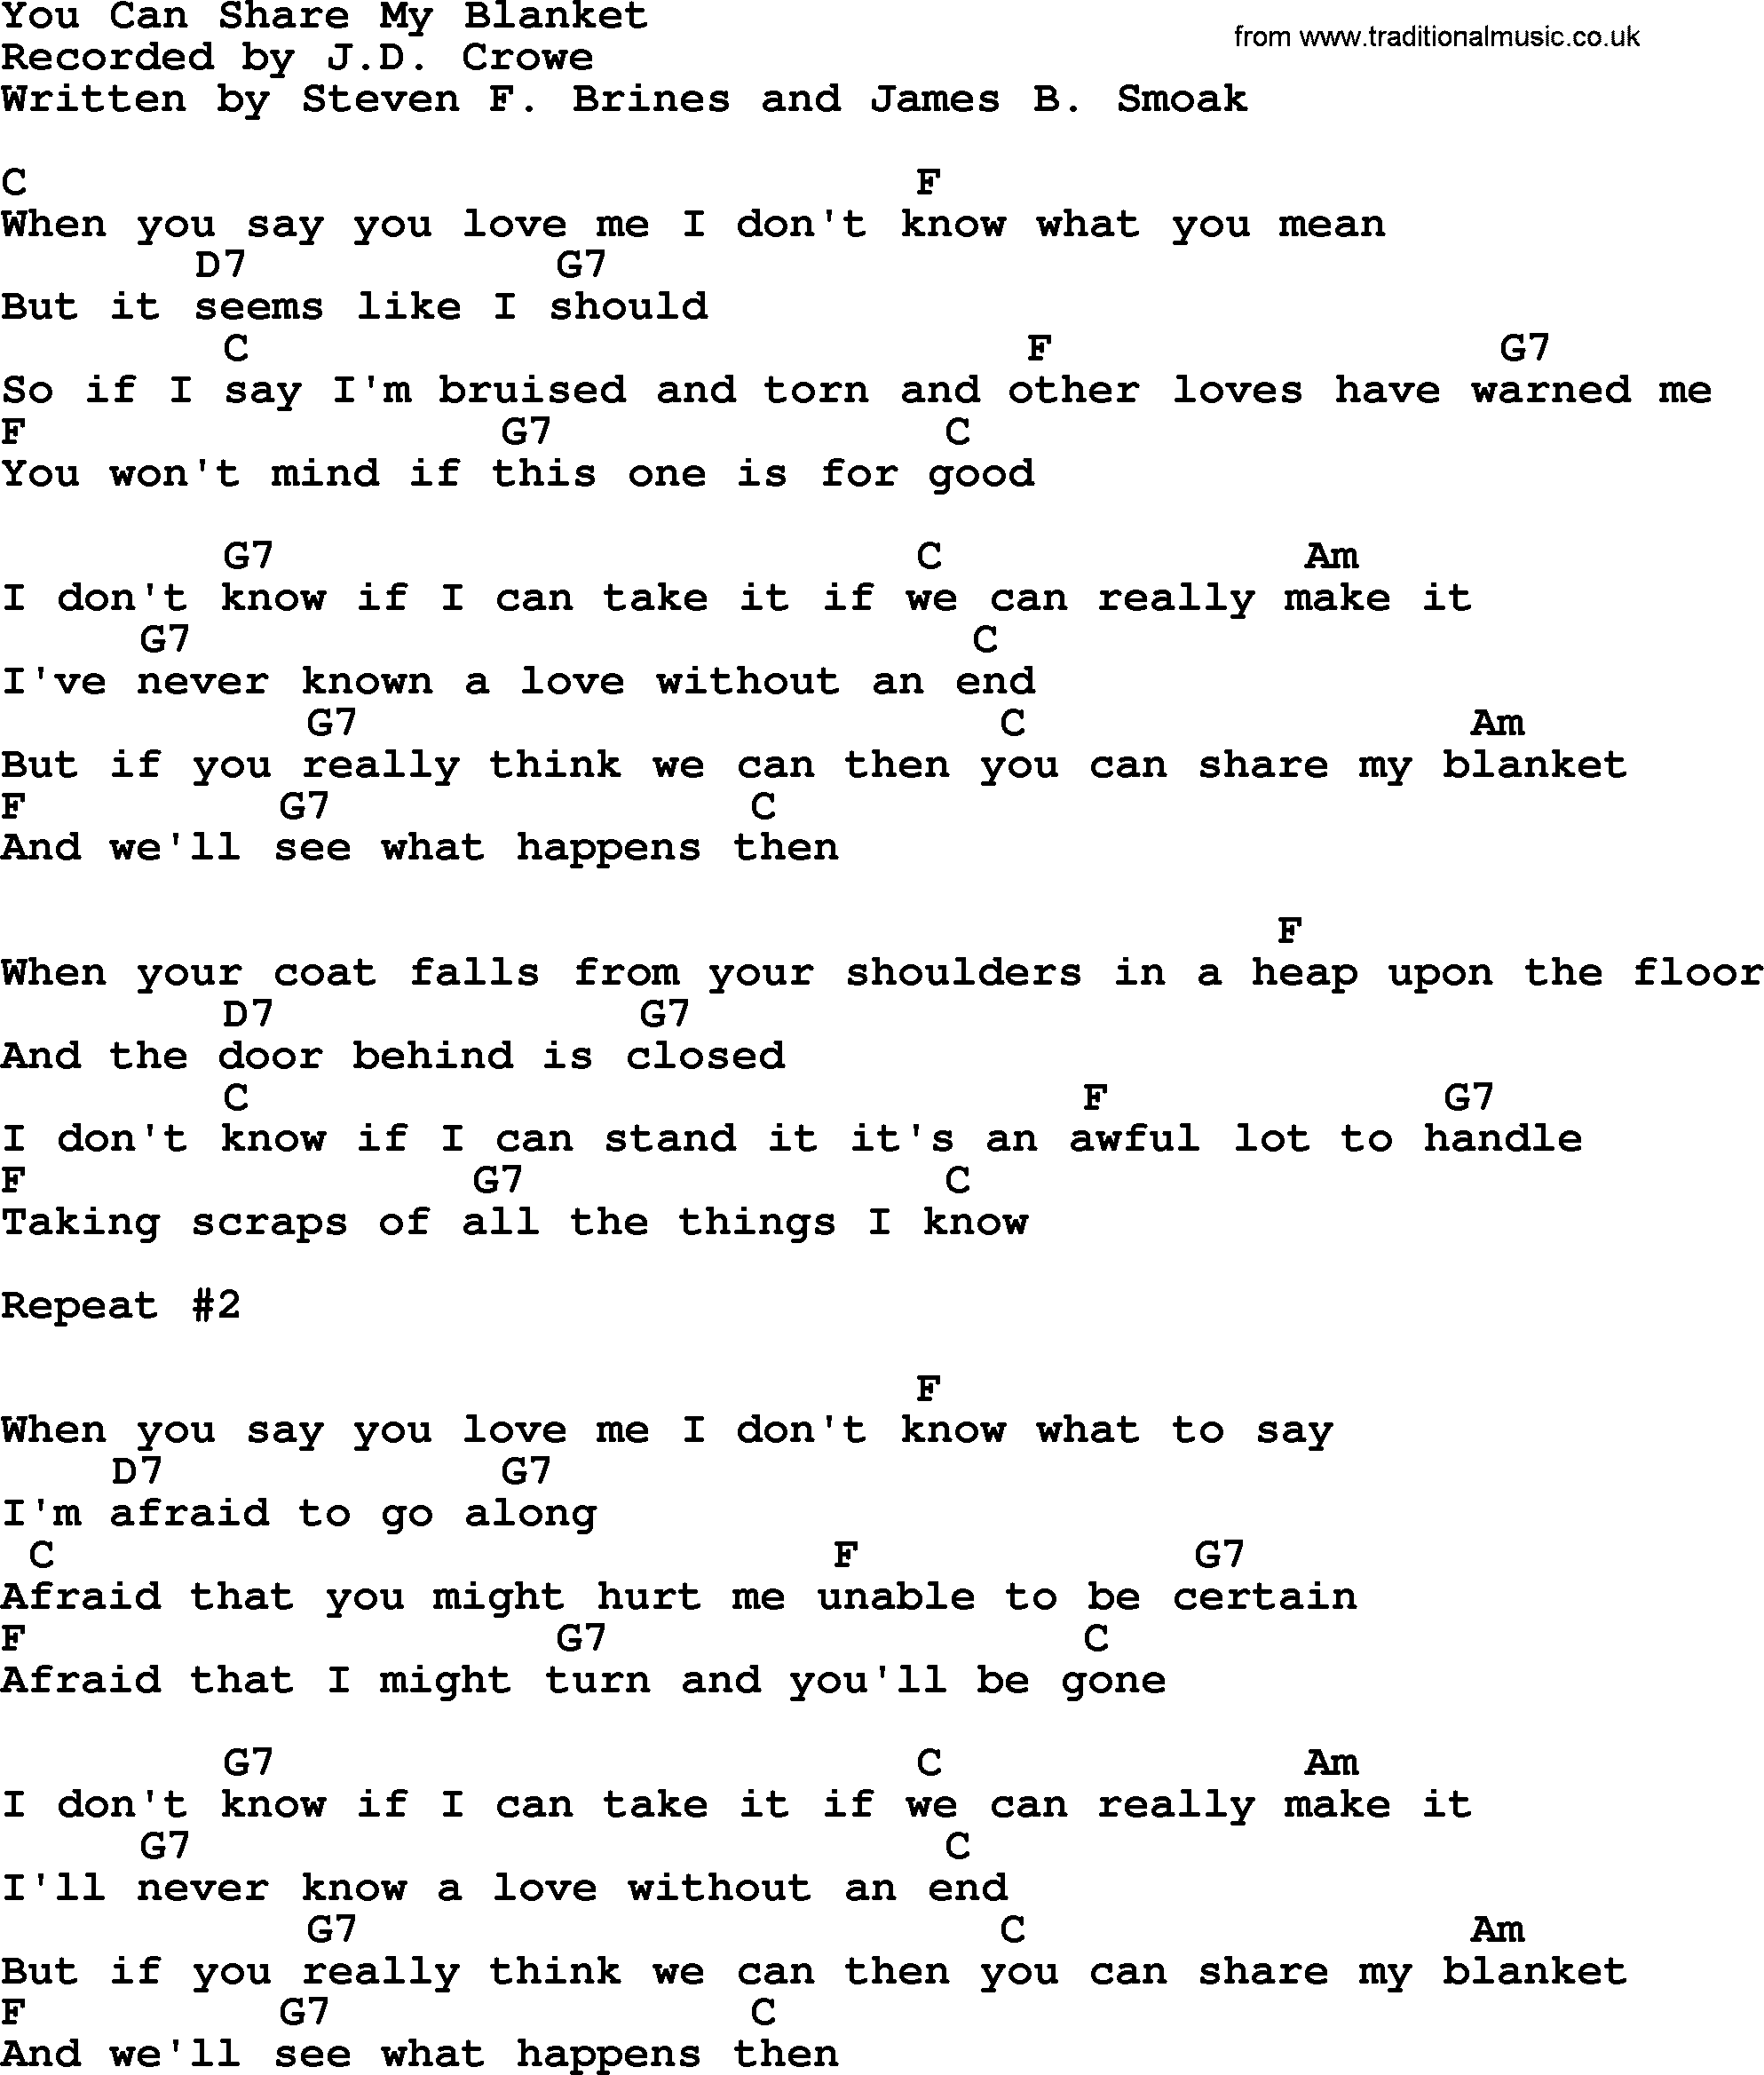 You Can Share My Blanket - Bluegrass lyrics with chords